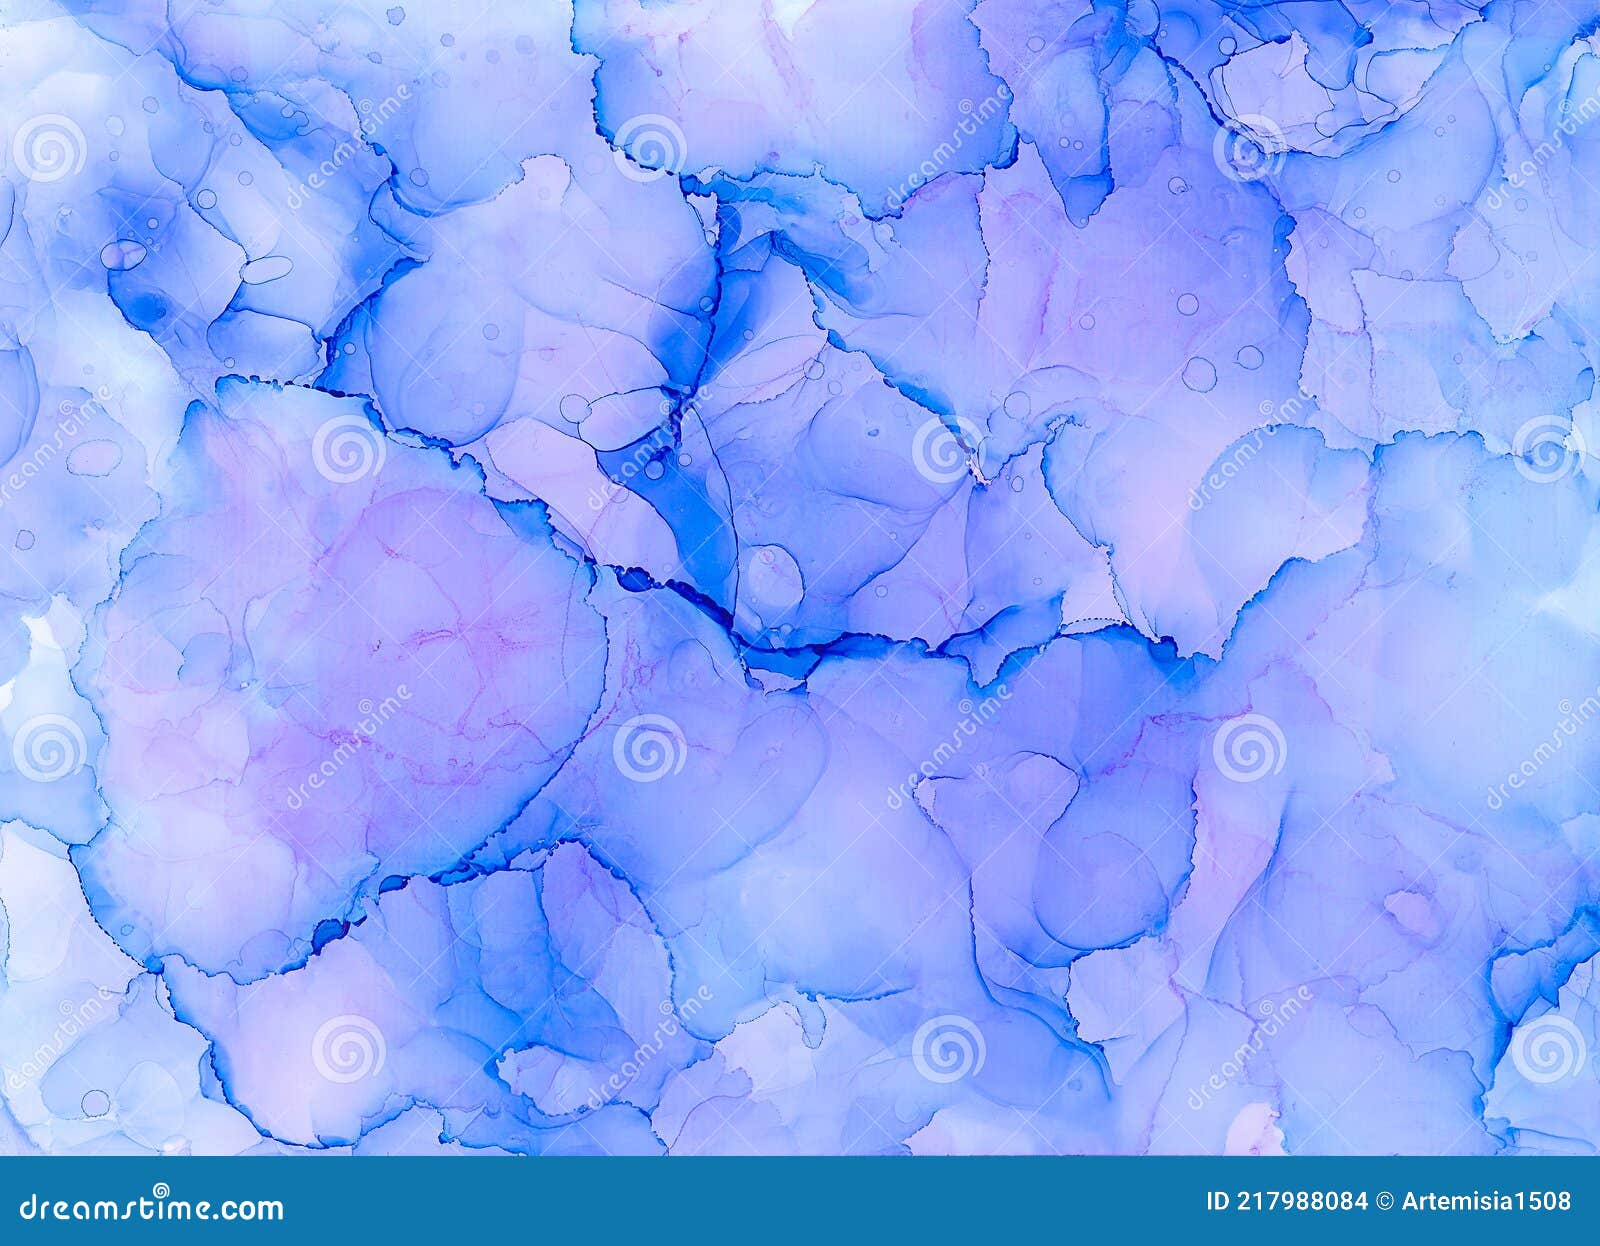 Blue Alcohol Ink, Alcohol ink paper, Watercolor ink texture